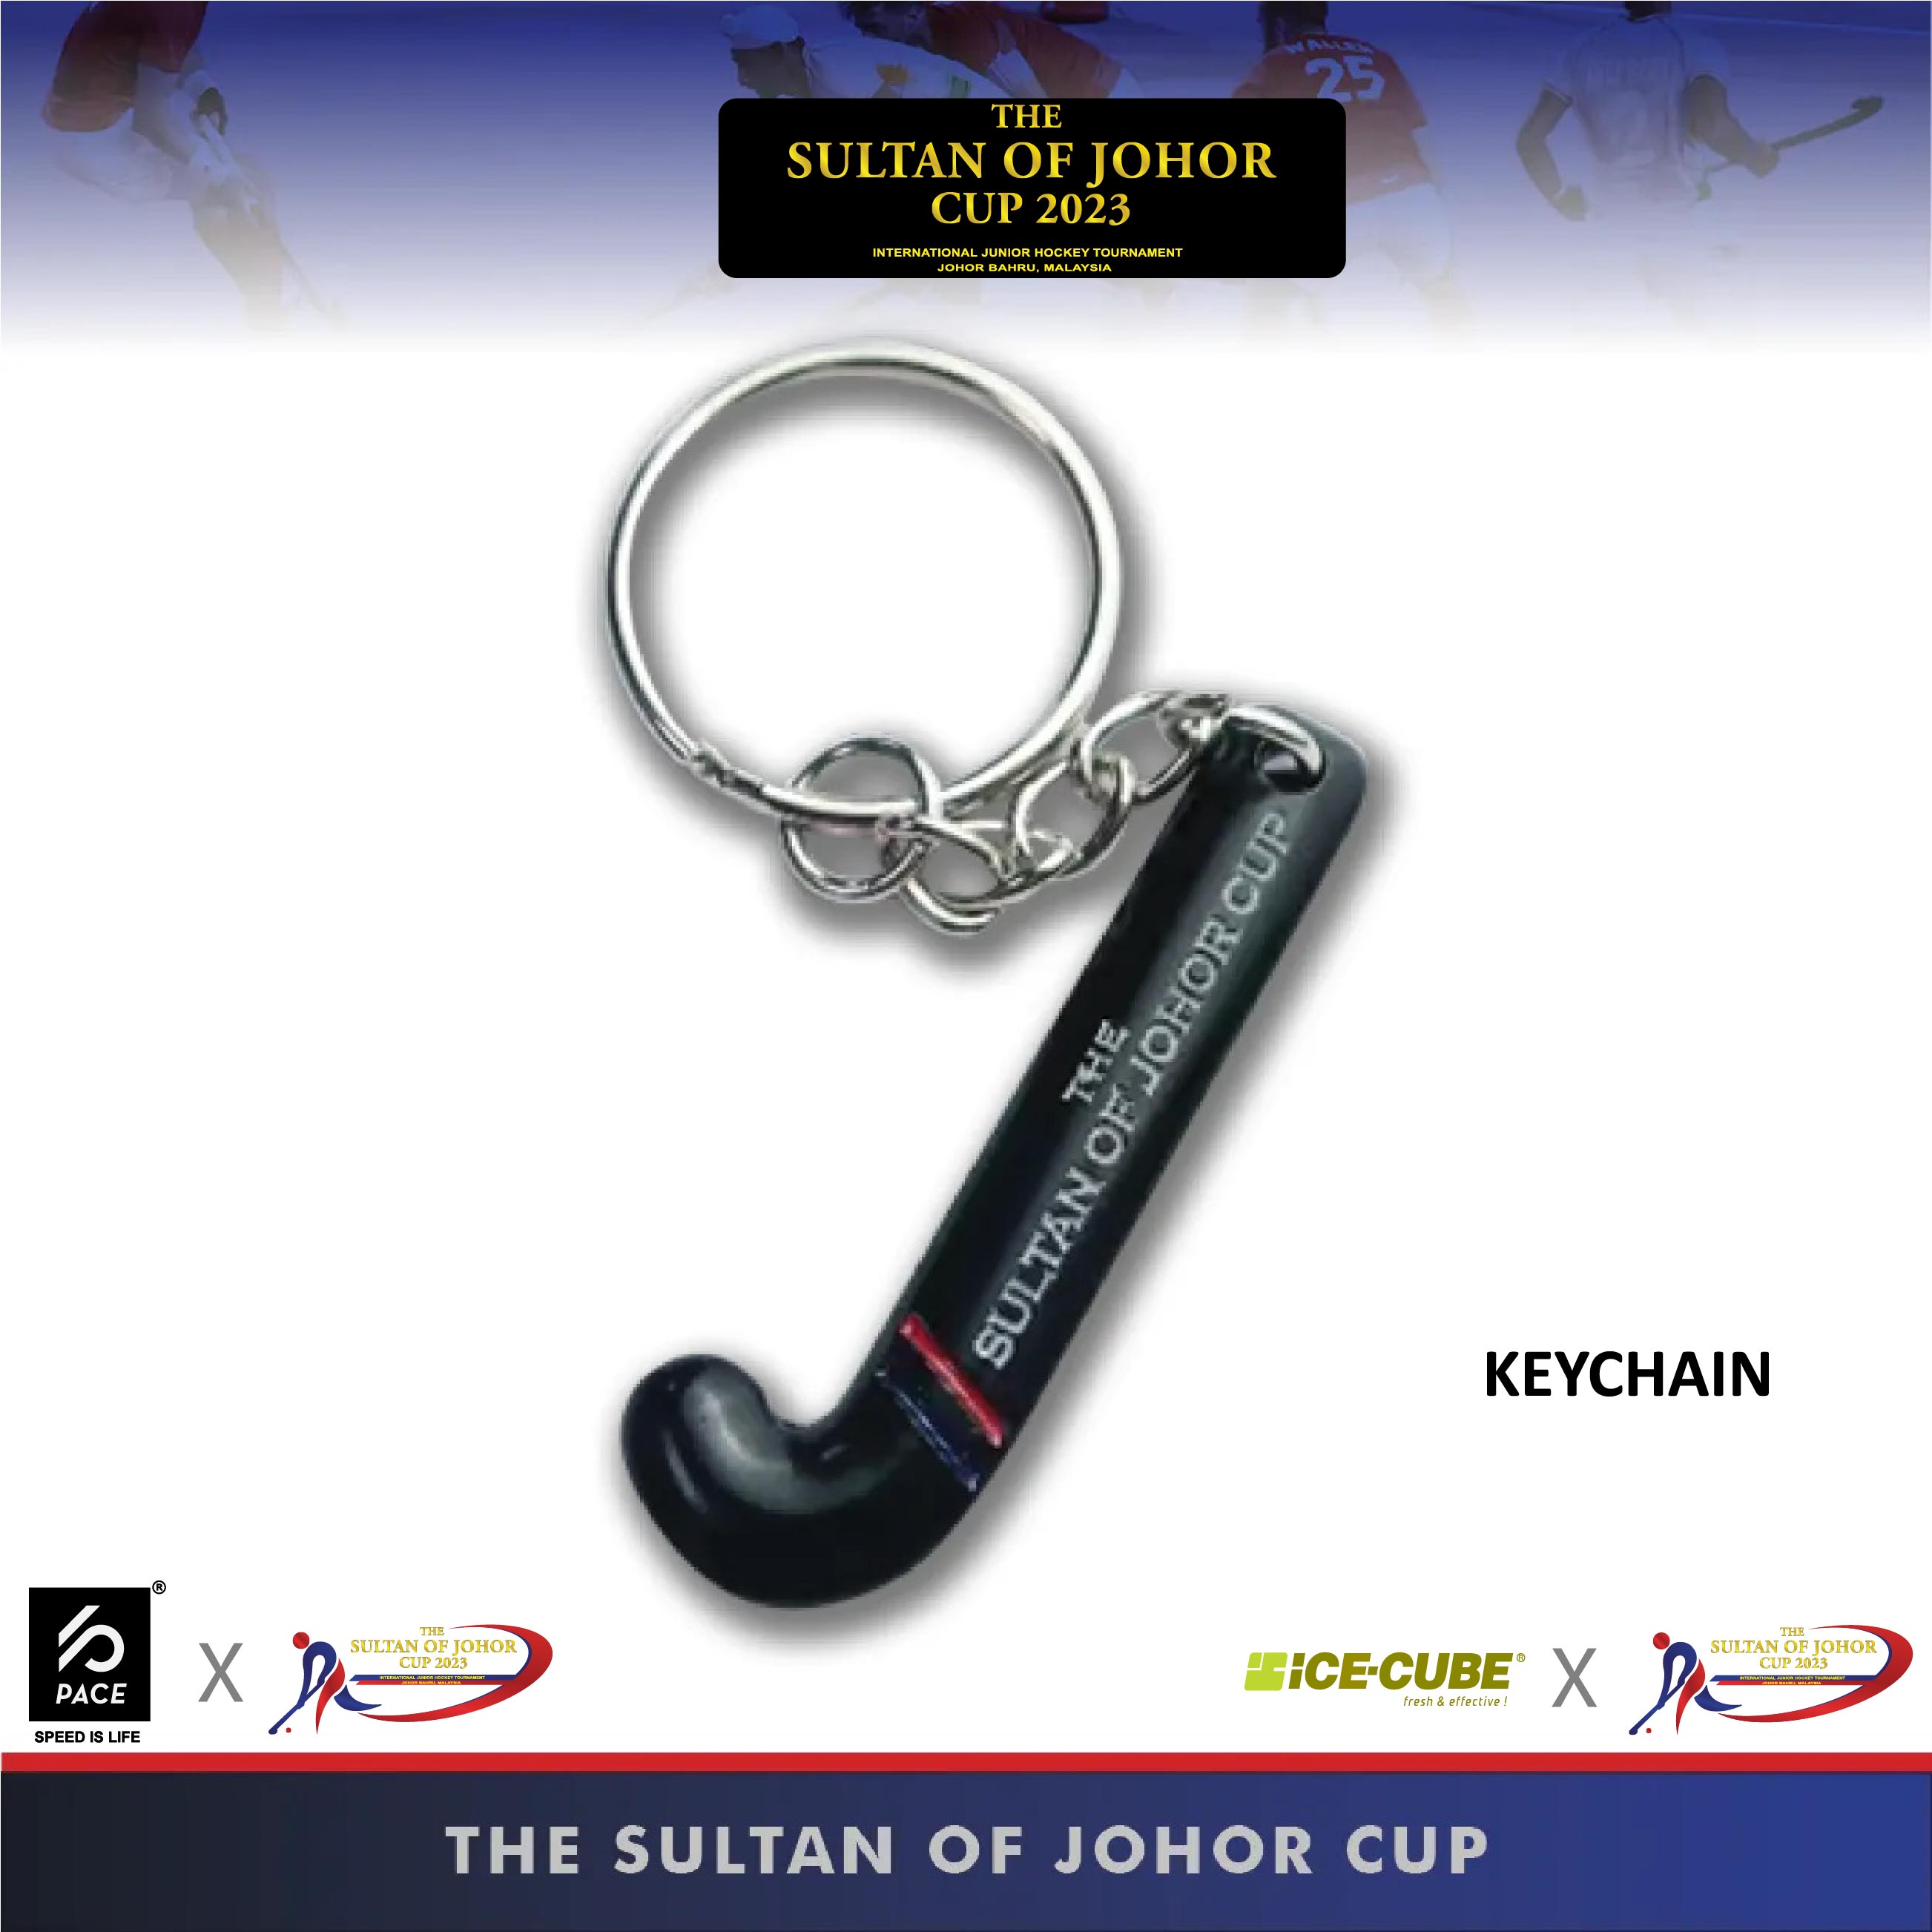 THE SULTAN OF JOHOR CUP - KEYCHAIN